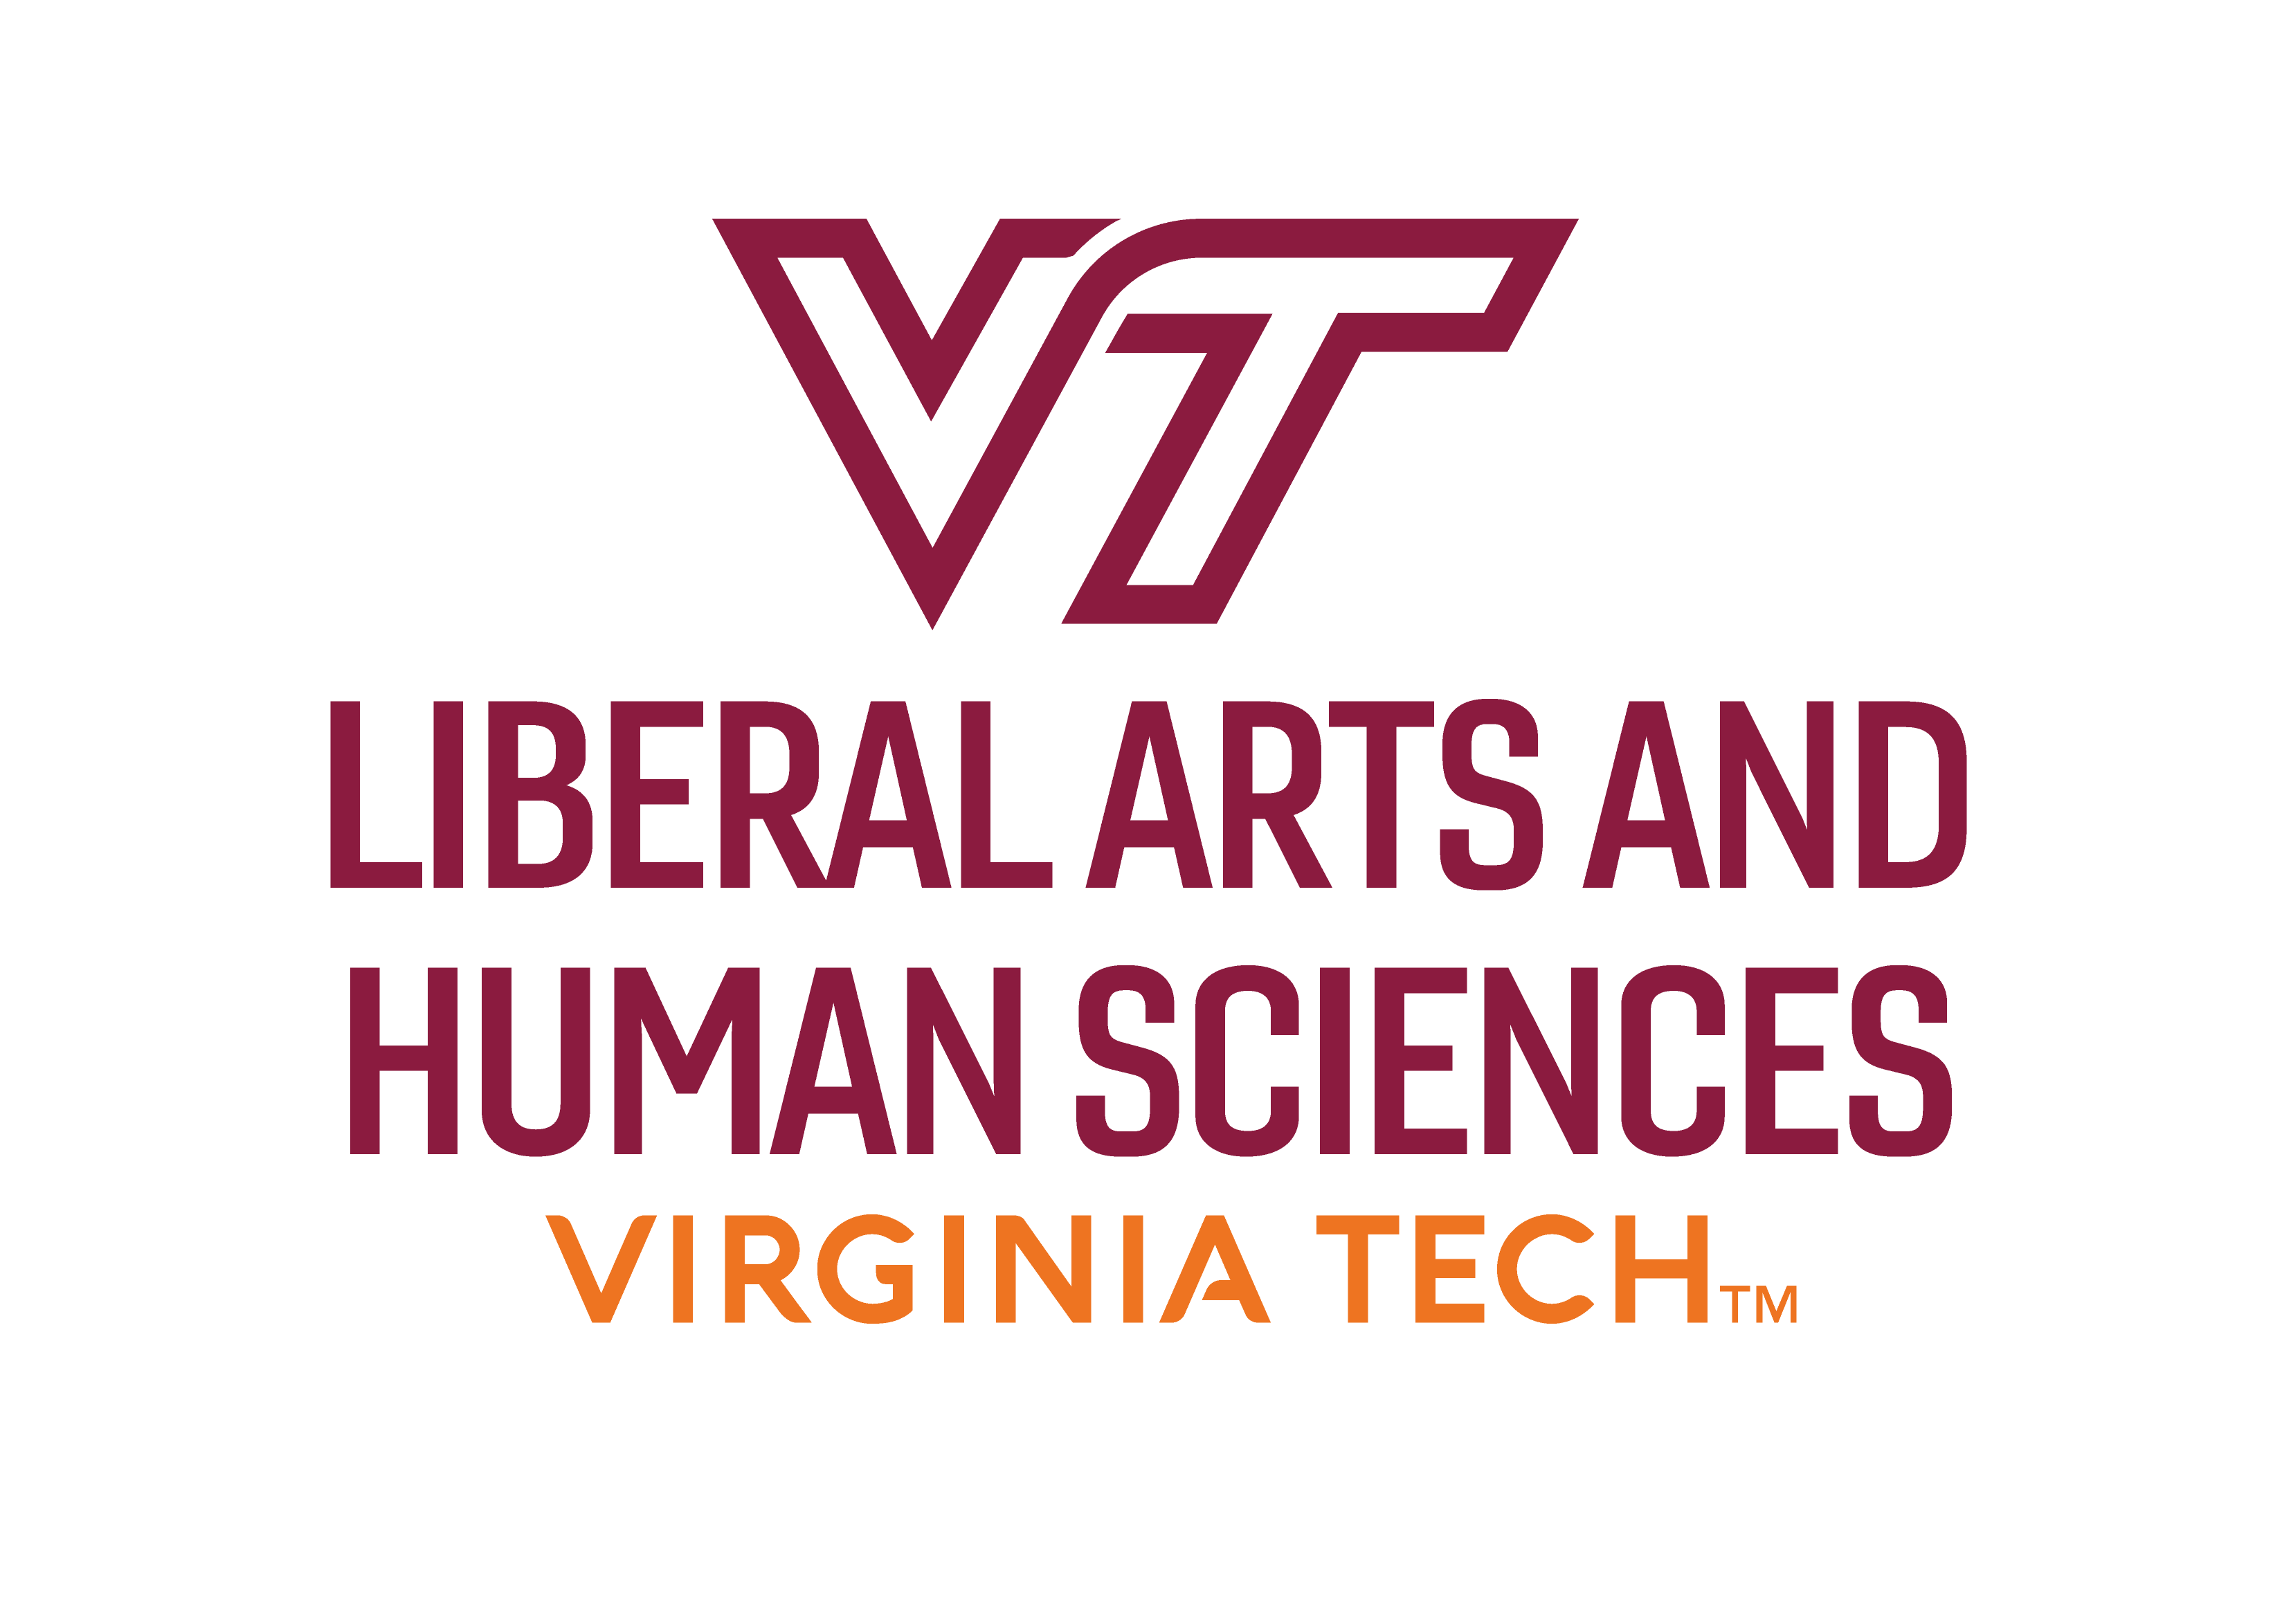 Virginia Tech College of Liberal Arts and Human Sciences logo